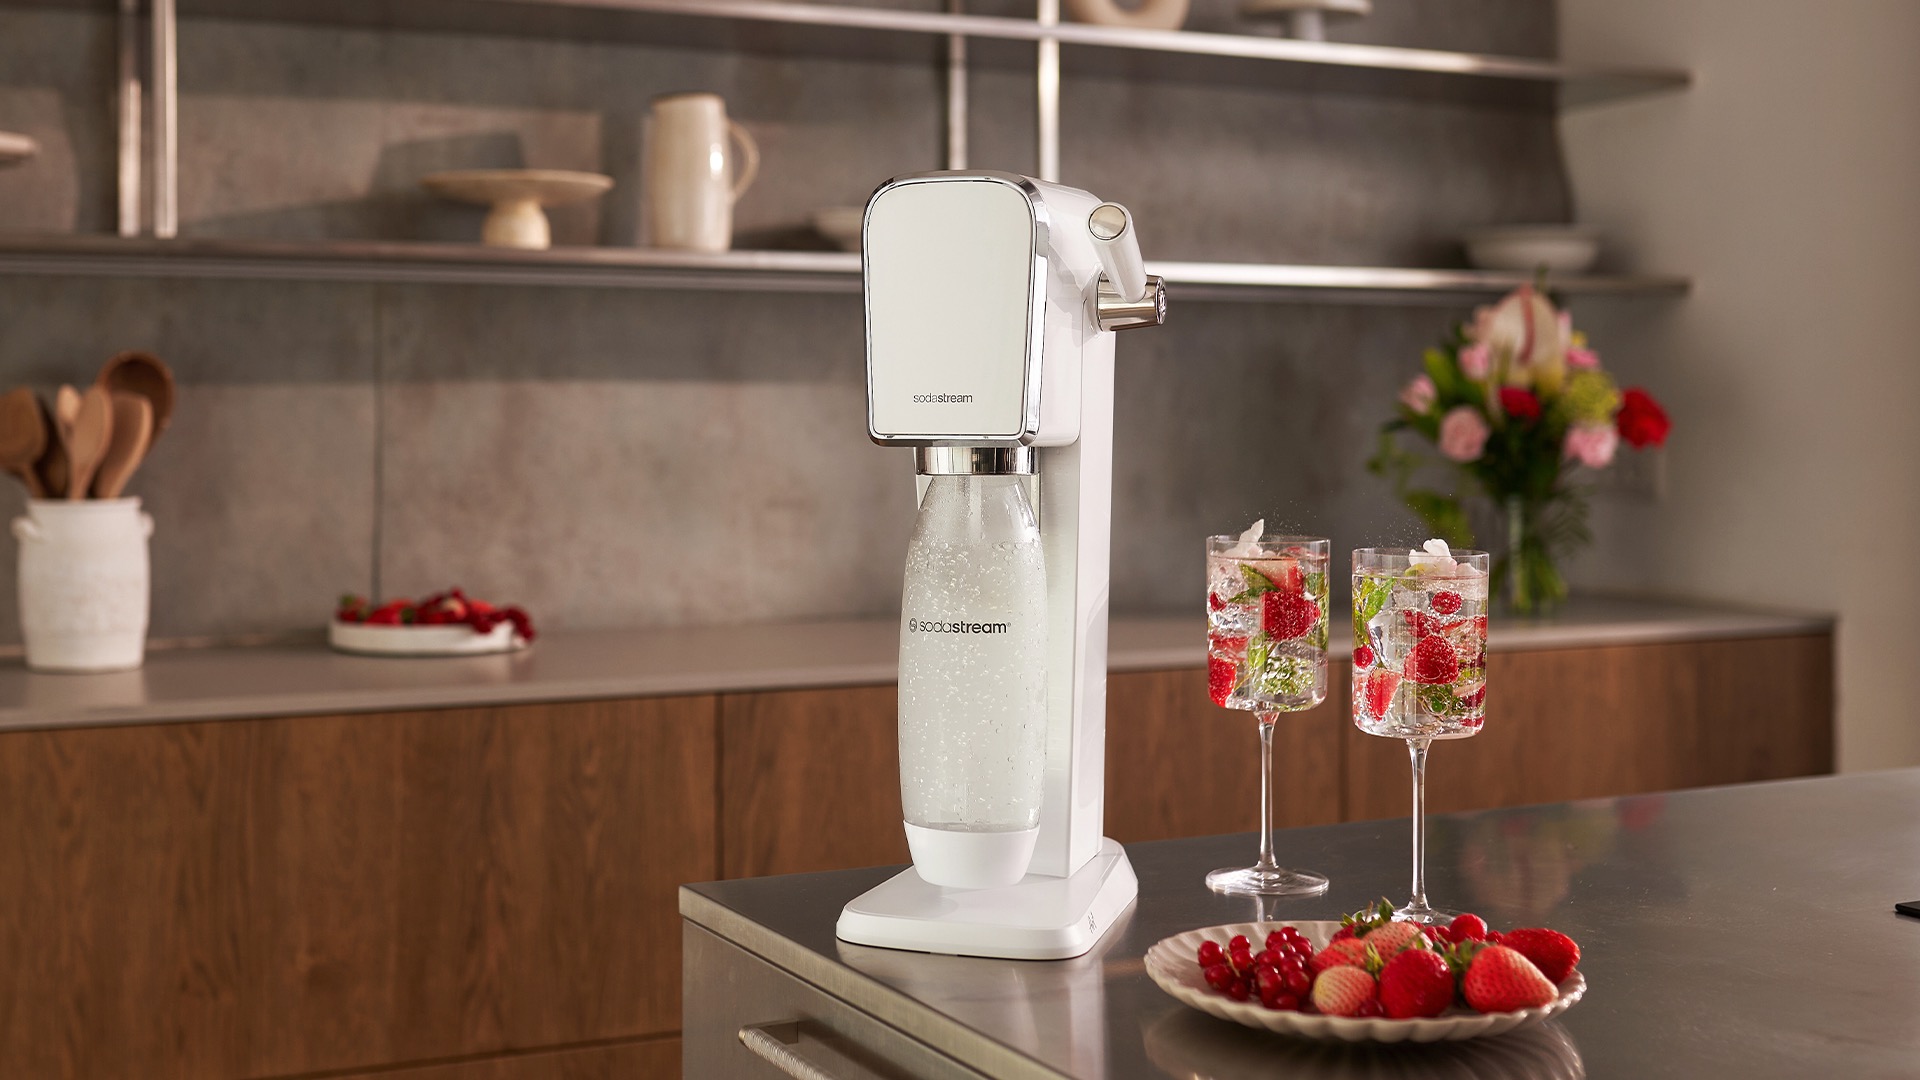 SodaStream Art sparkling water maker, seated on a kitchen countertop next to two glasses of sparkling water filled with strawberries